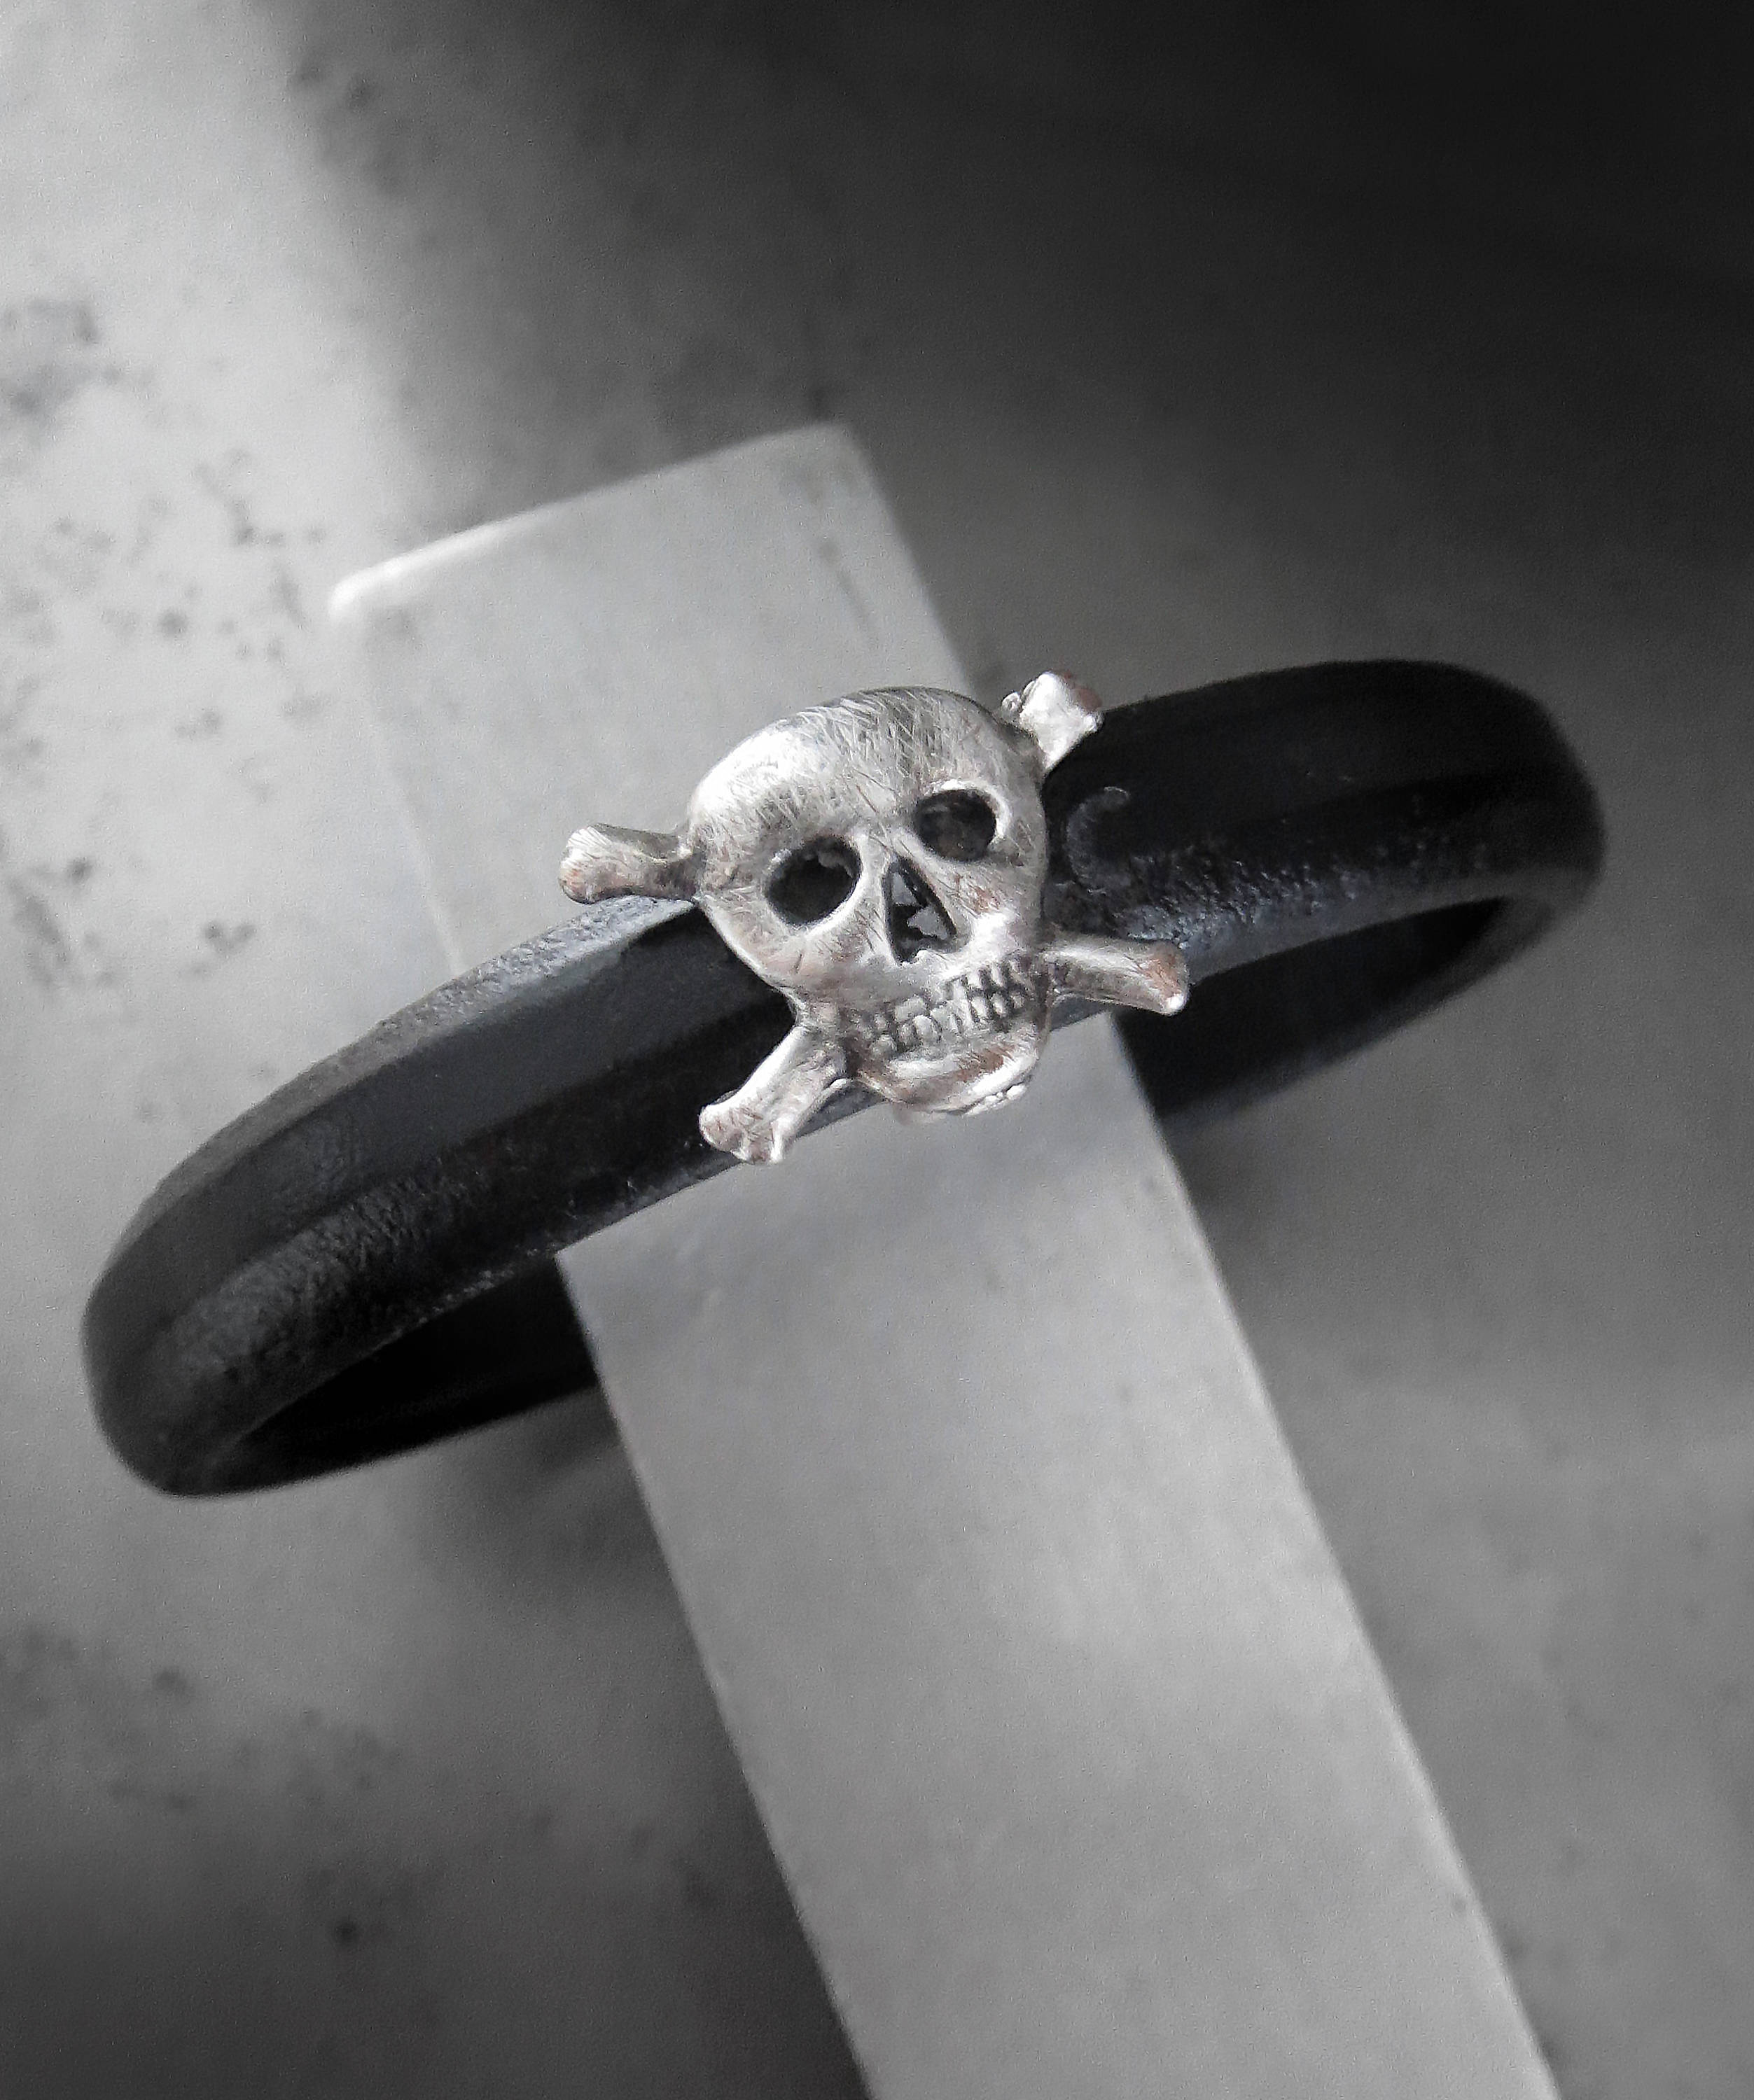 Black Leather Bracelet with Silver Skull and Cross Bones